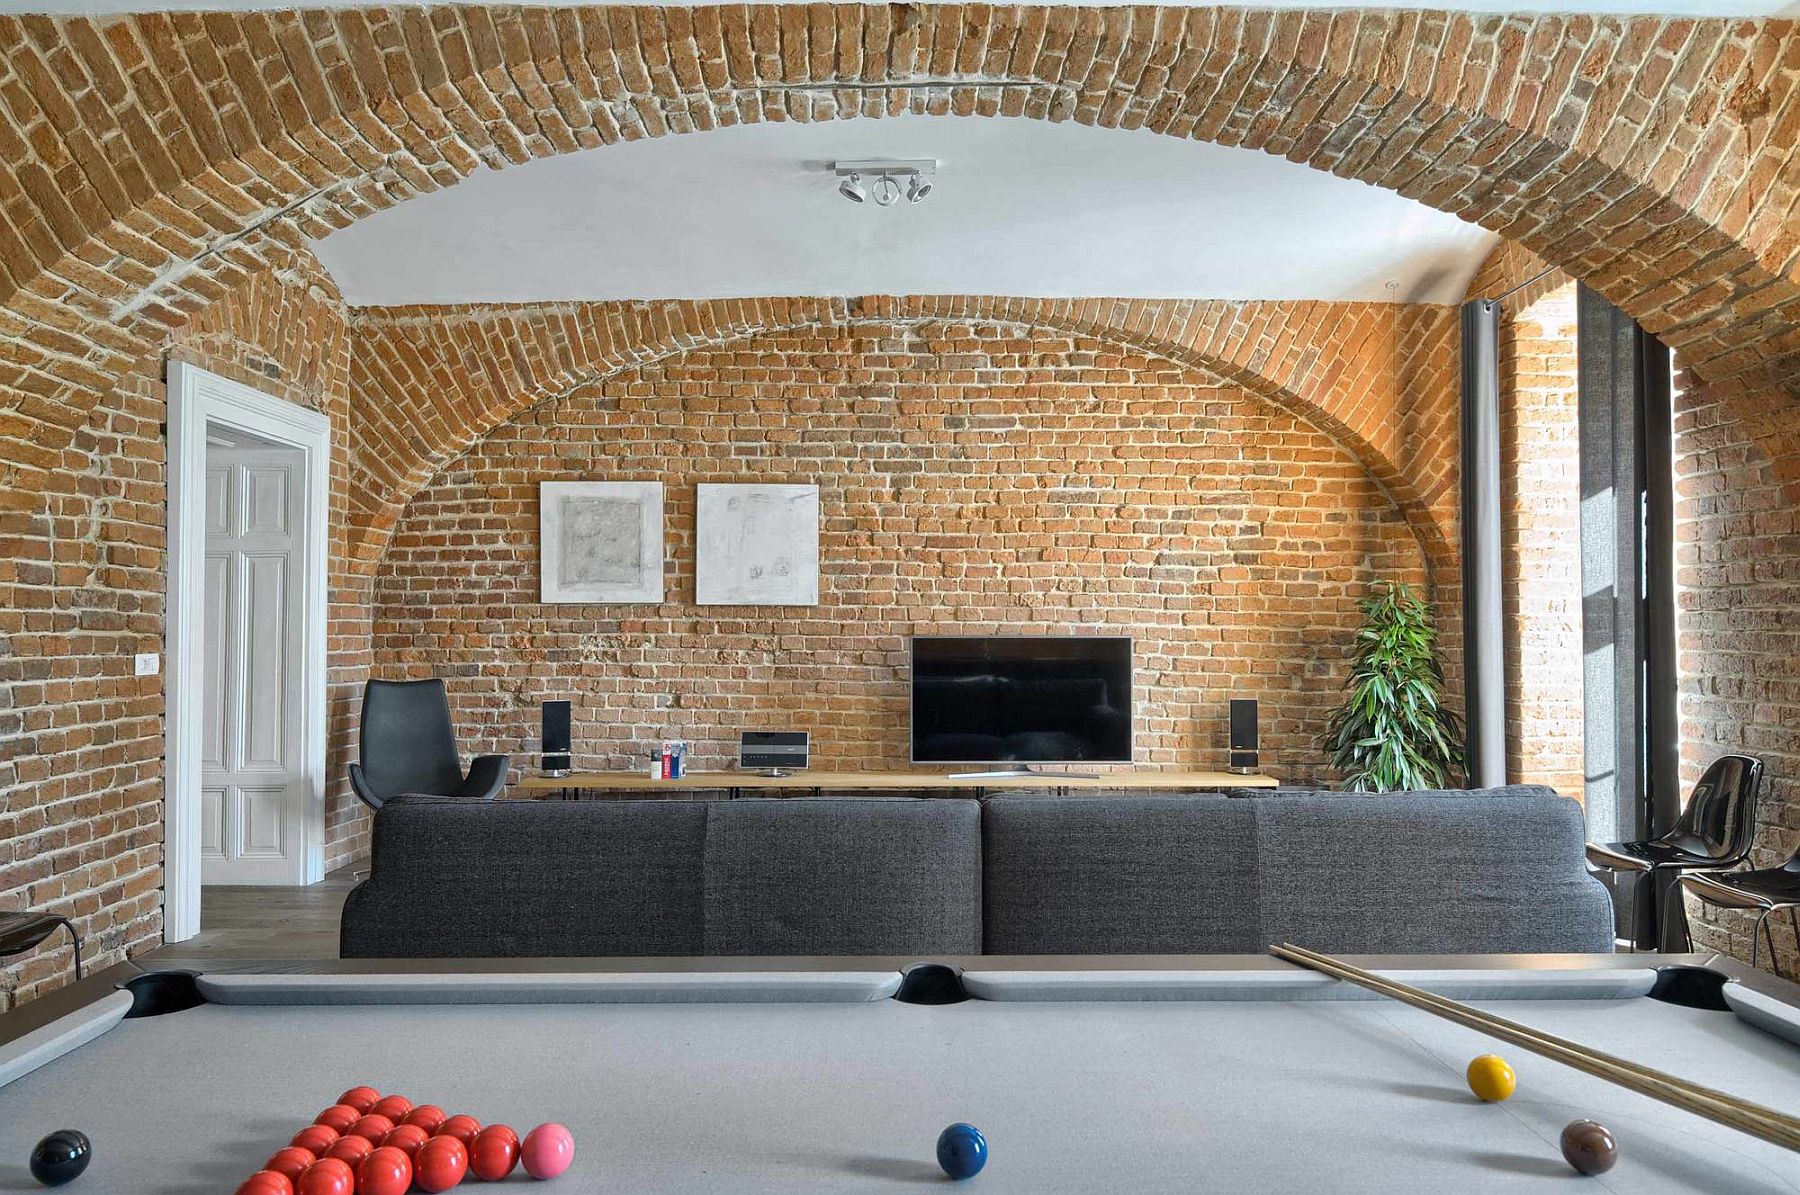 Original-exposed-brick-walls-of-the-restored-apartment-steal-the-show-here